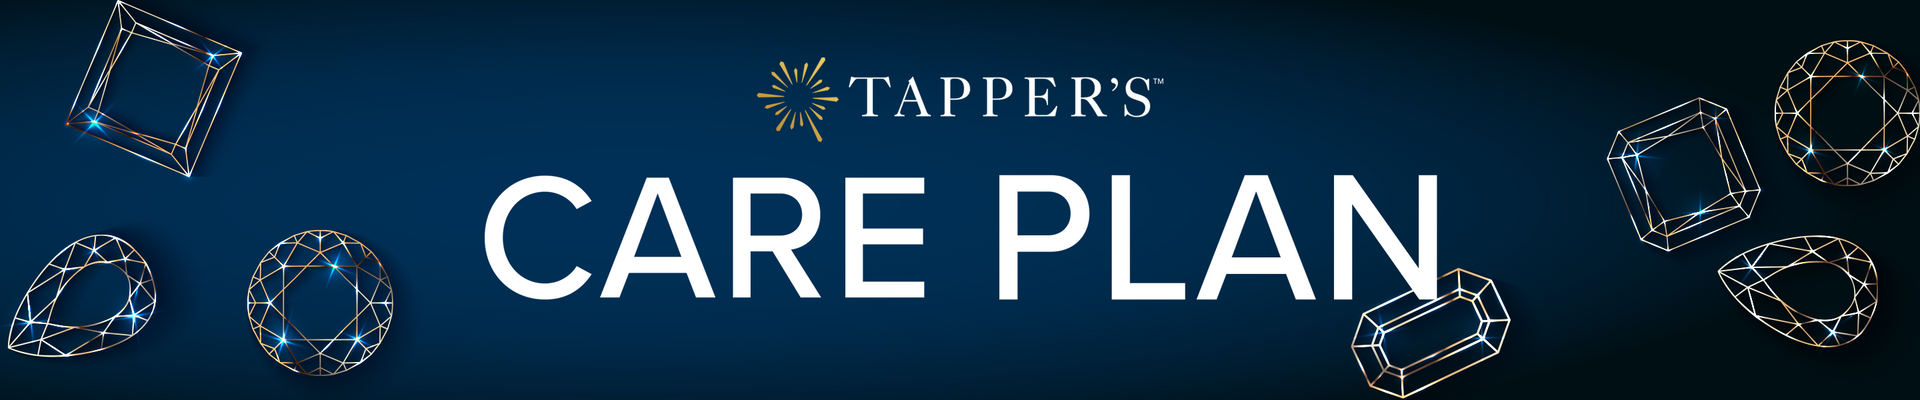 Tapper's Care Plan on a dark navy blue background with iridescent outlines of diamonds. 